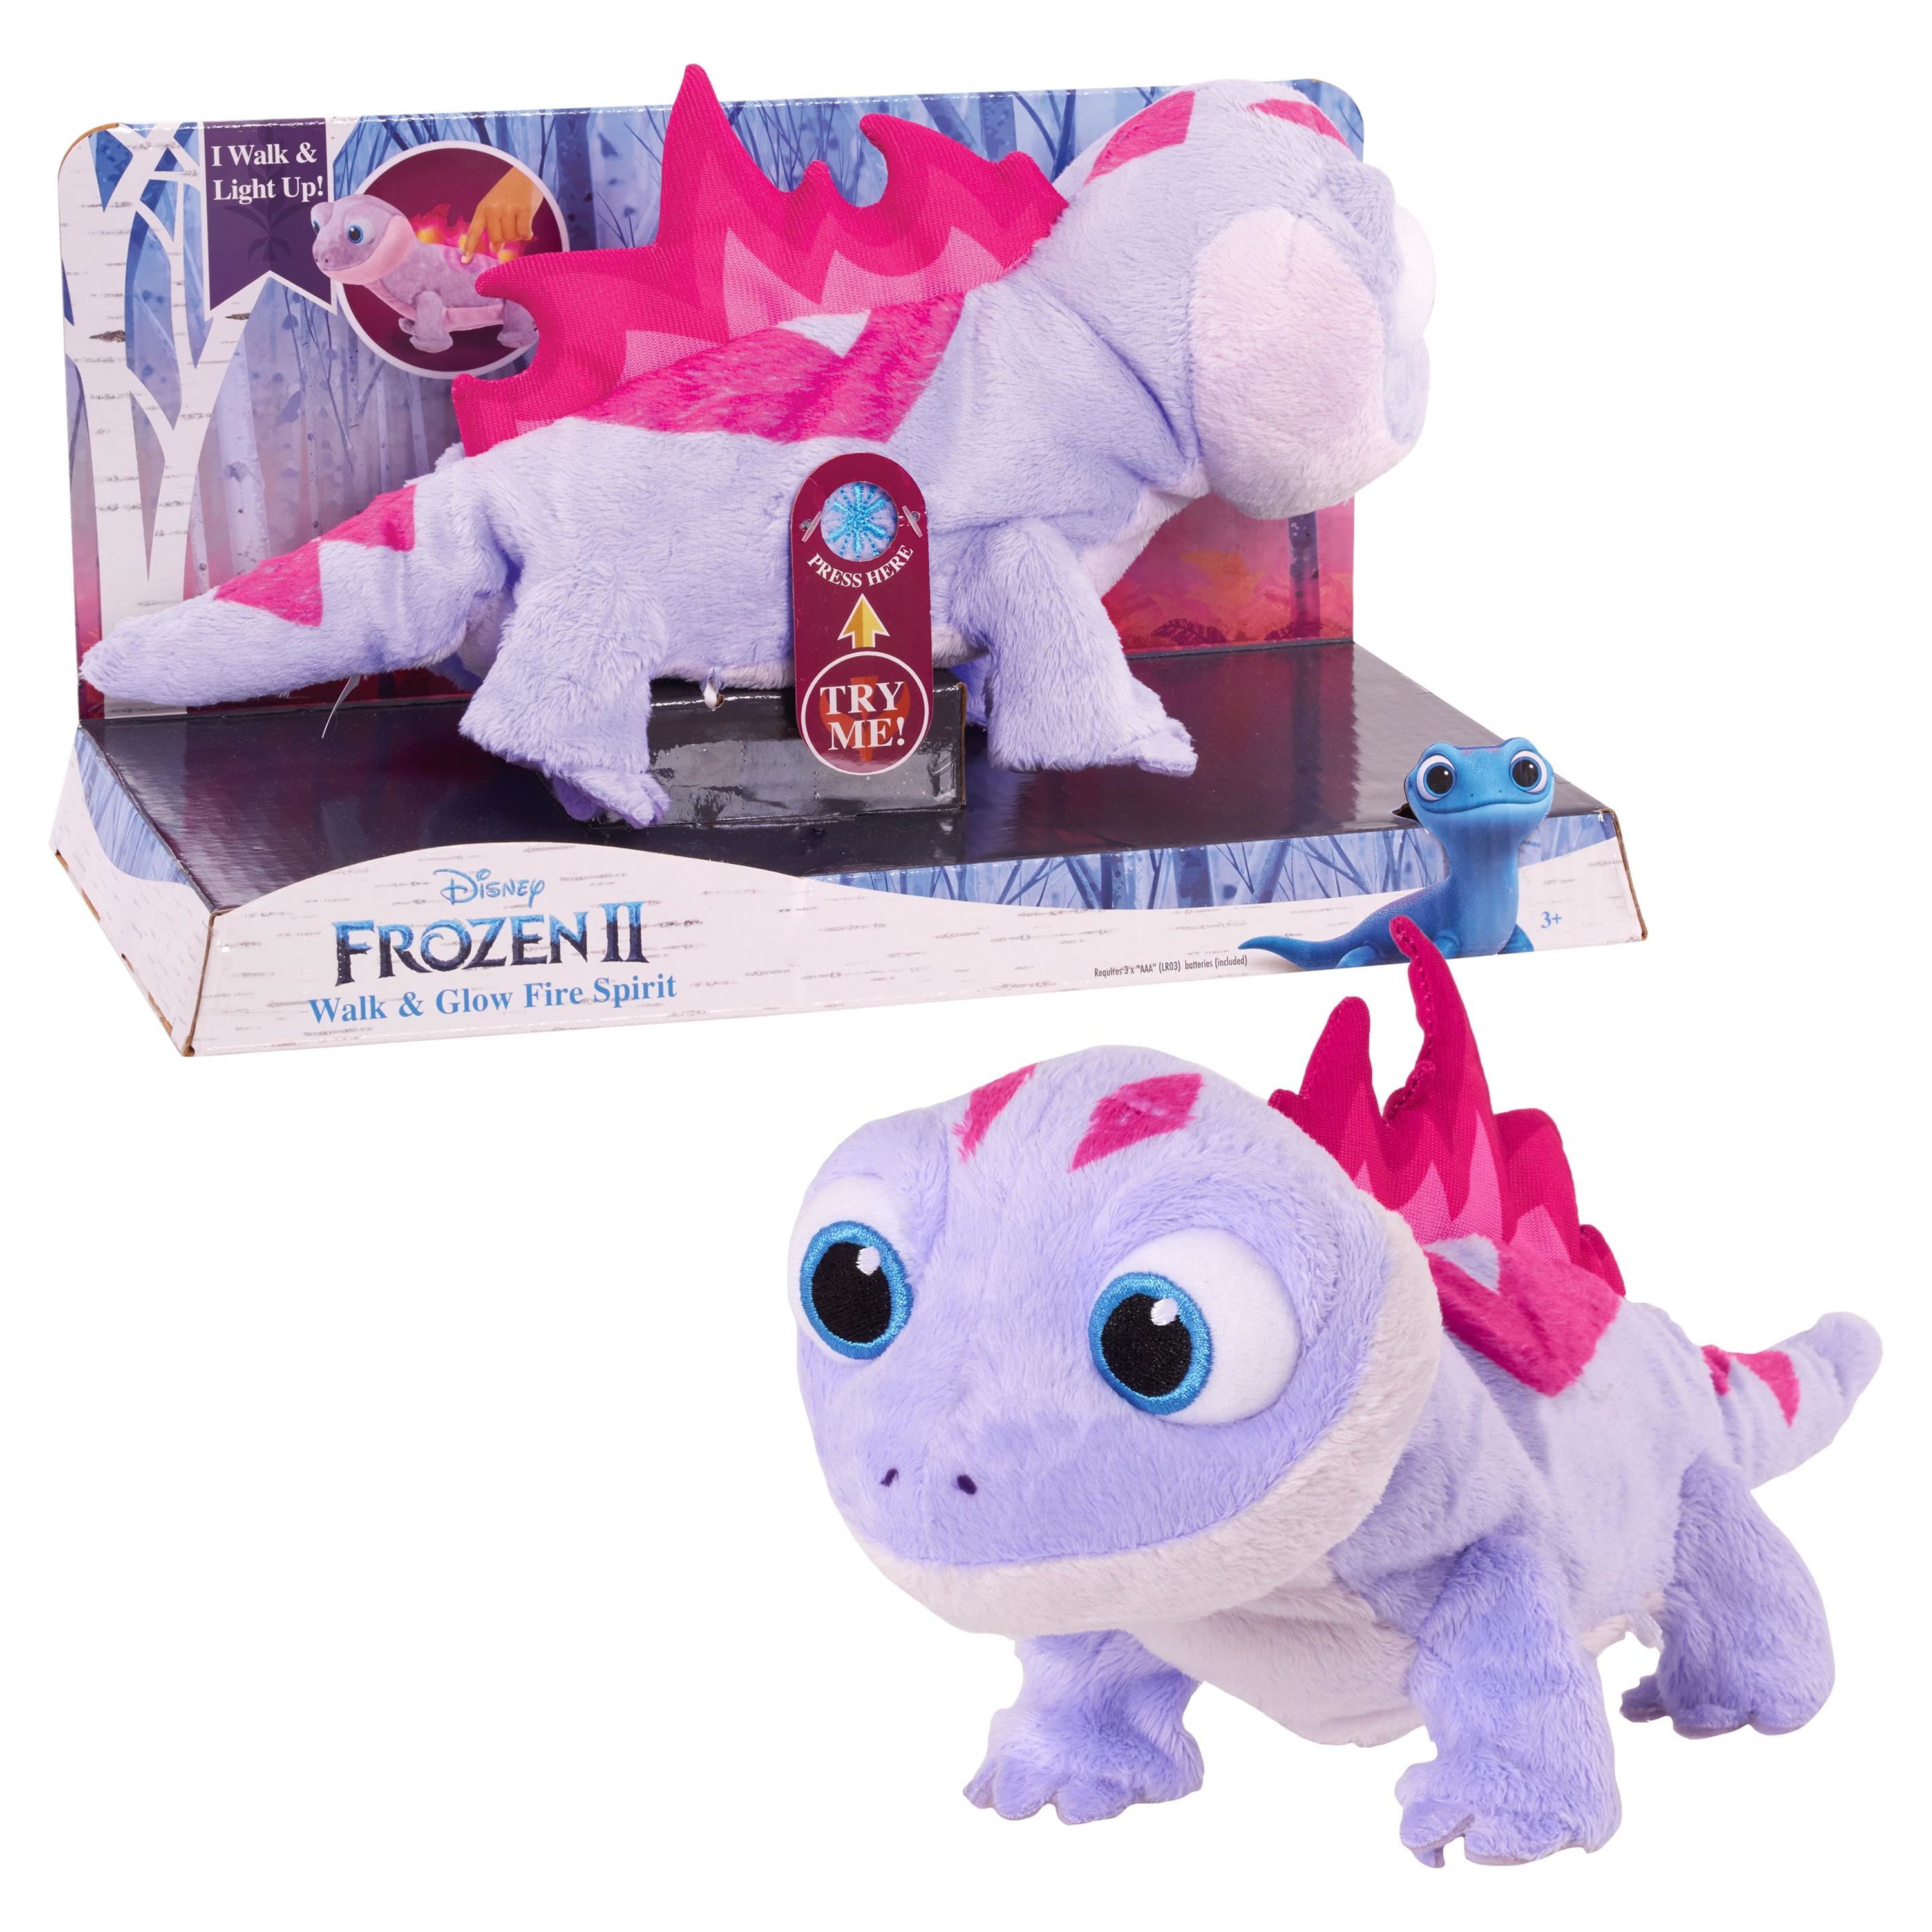 Disney Frozen 2 Walk & Glow Bruni The Salamander, Lights and Sounds Stuffed Animal, Officially Licensed Kids Toys for Ages 3 Up, Gifts and Presents - image 1 of 5